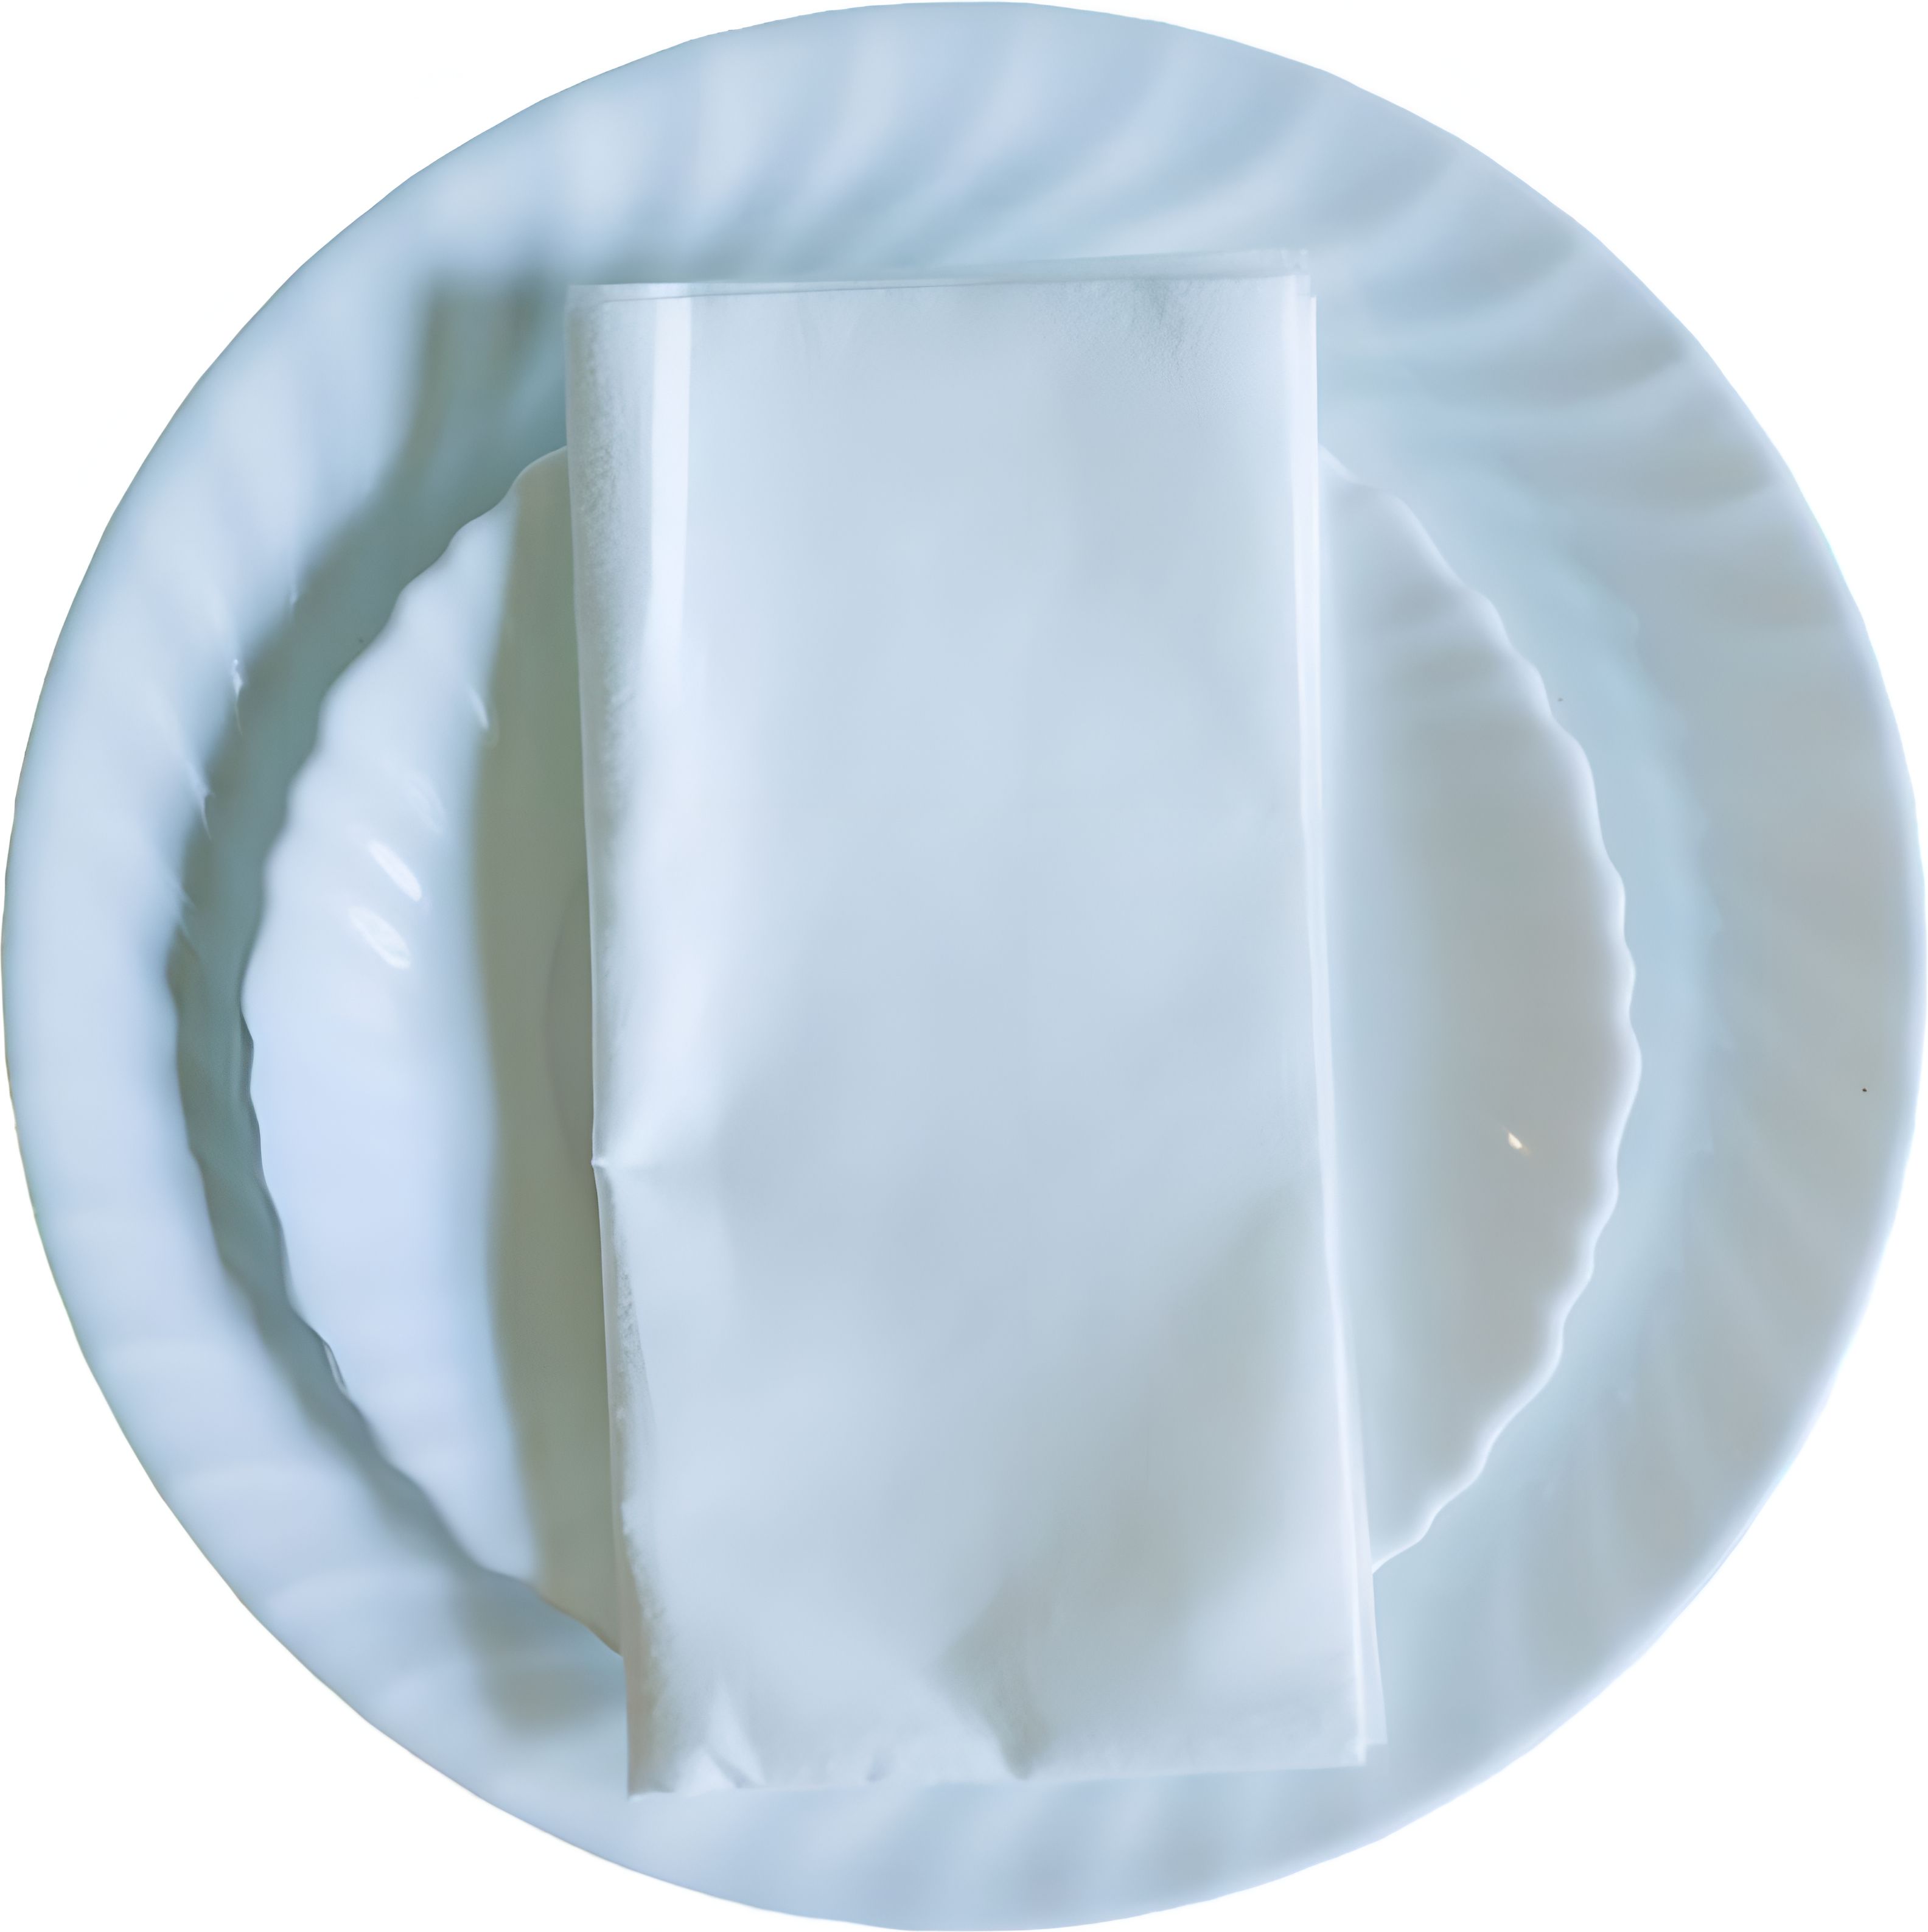 Midwest Specialty Products - 14" x 14" White Airlaid Flat Napkin, 1000/cs - 395025